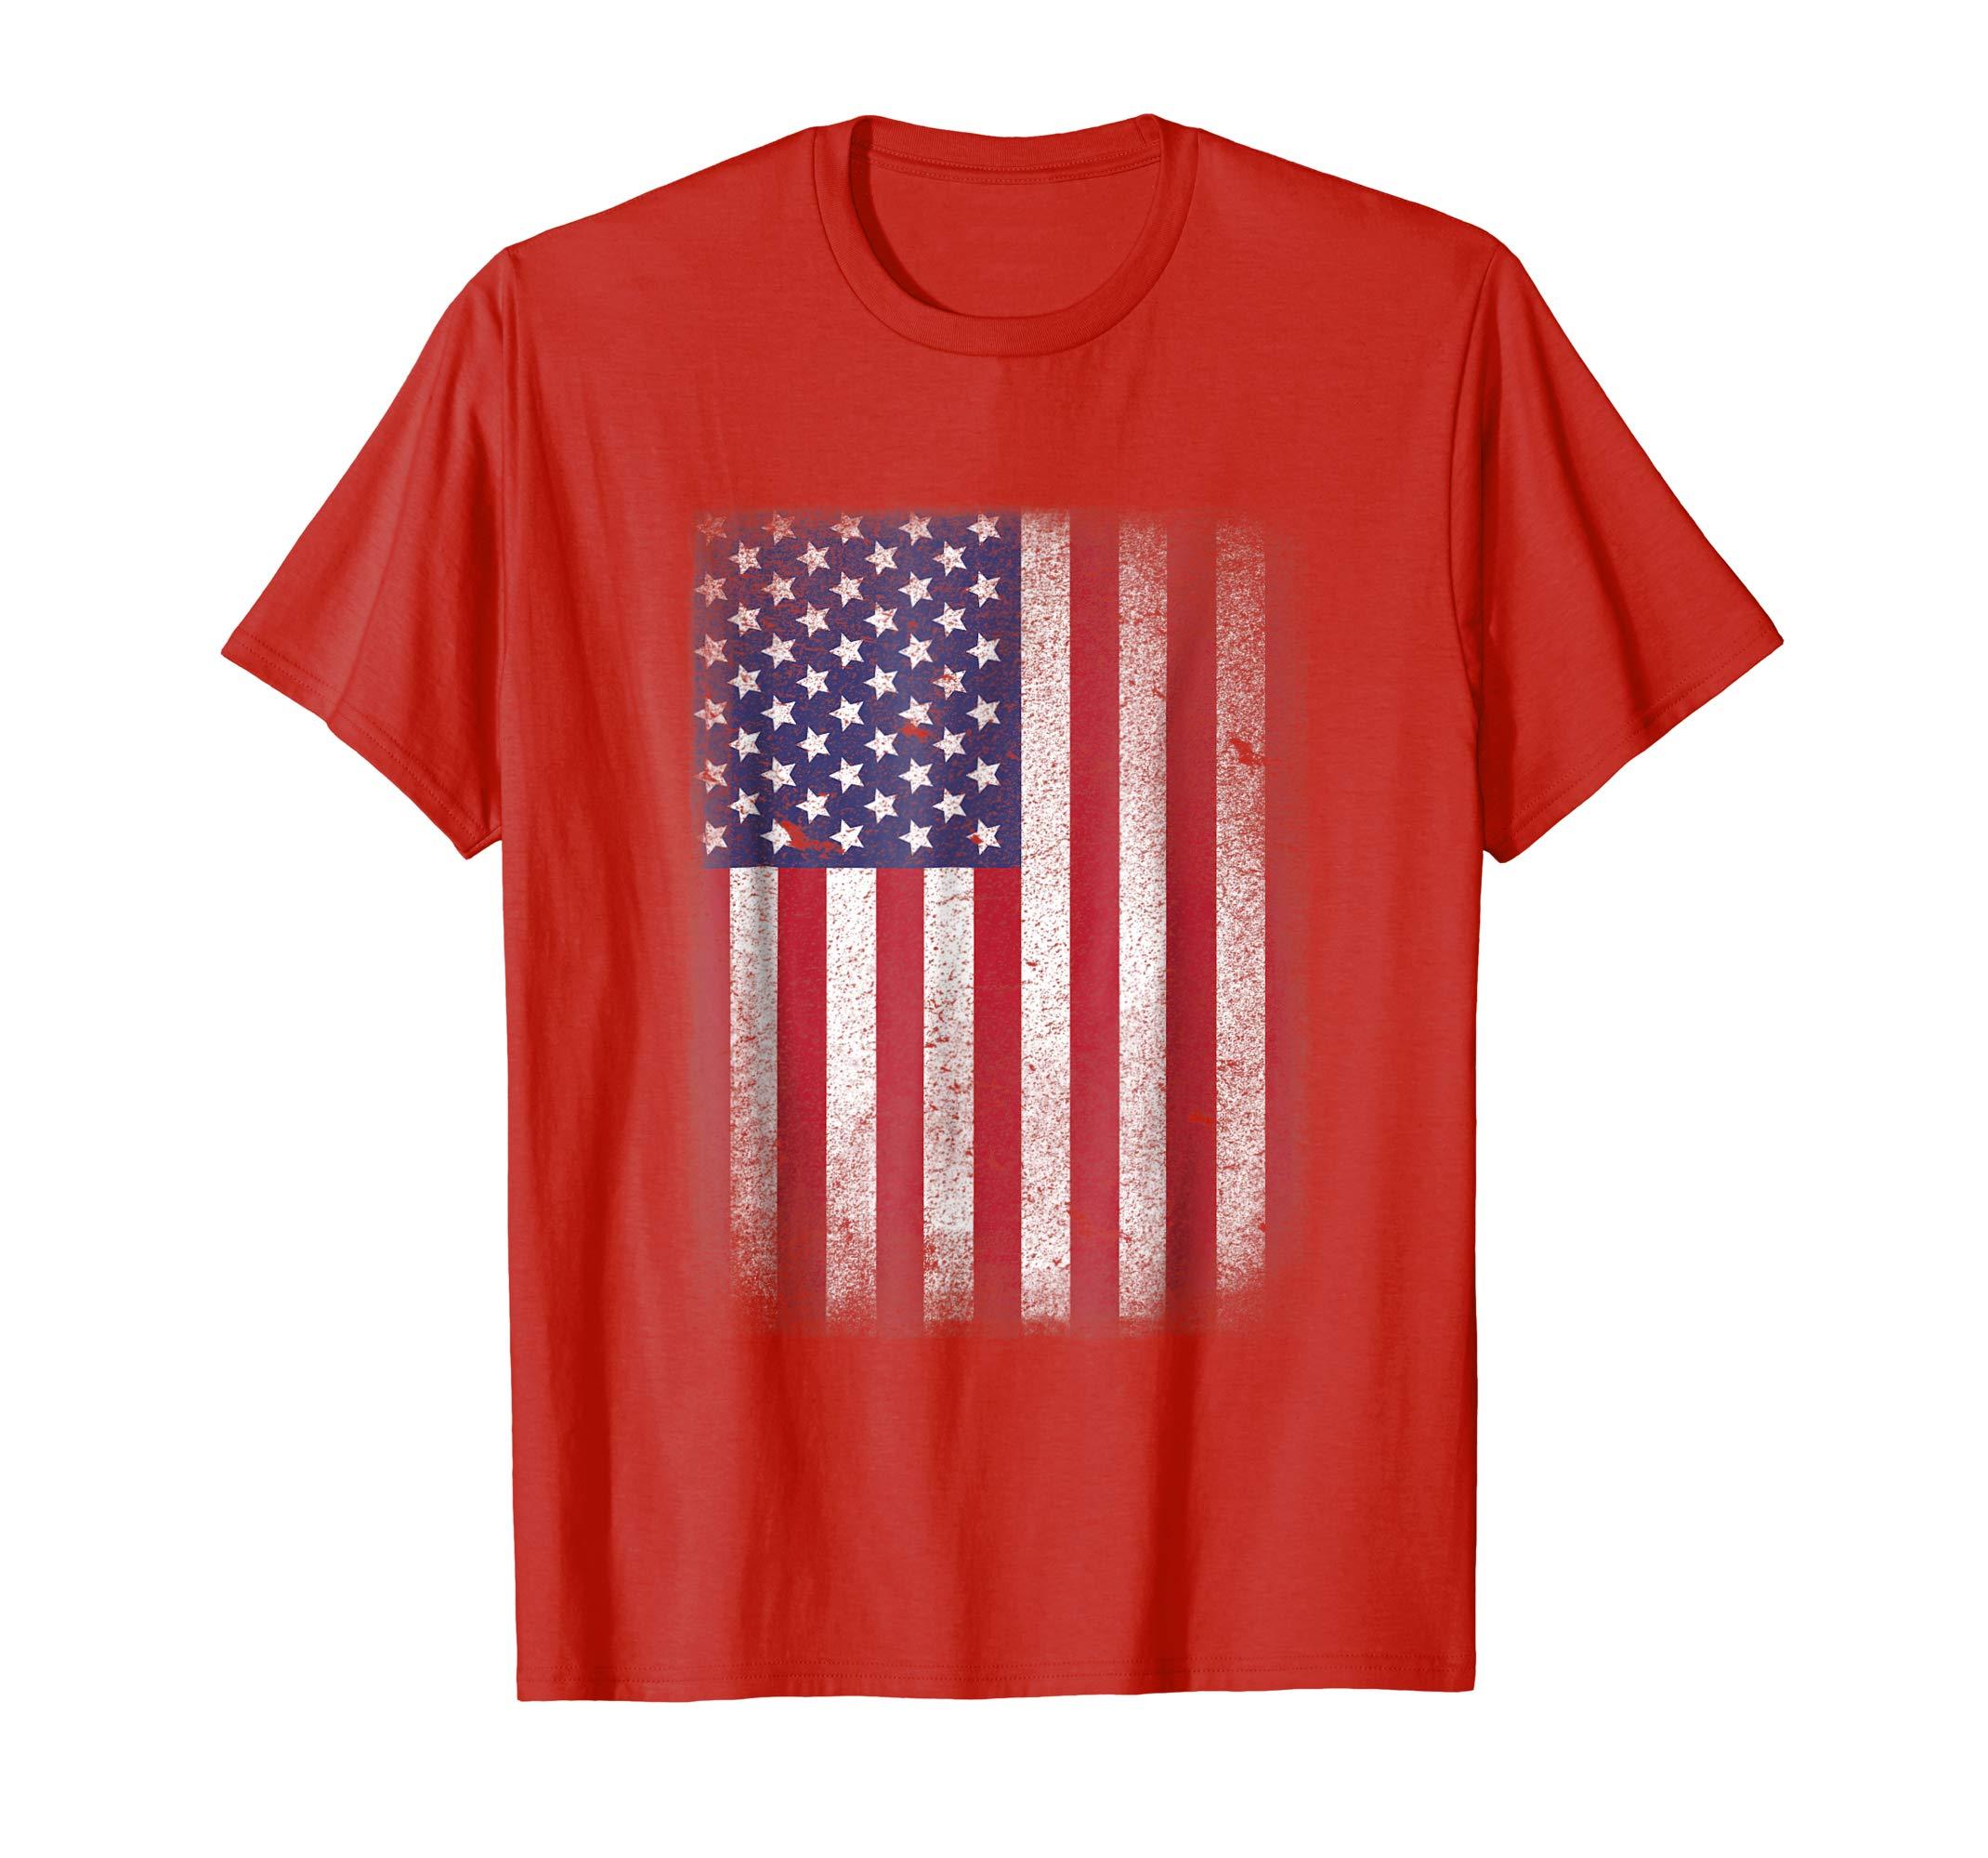 Red White and Blue Clothing Logo - Amazon.com: USA Flag T-shirt 4th July 4 Red White Blue Stars Stripes ...